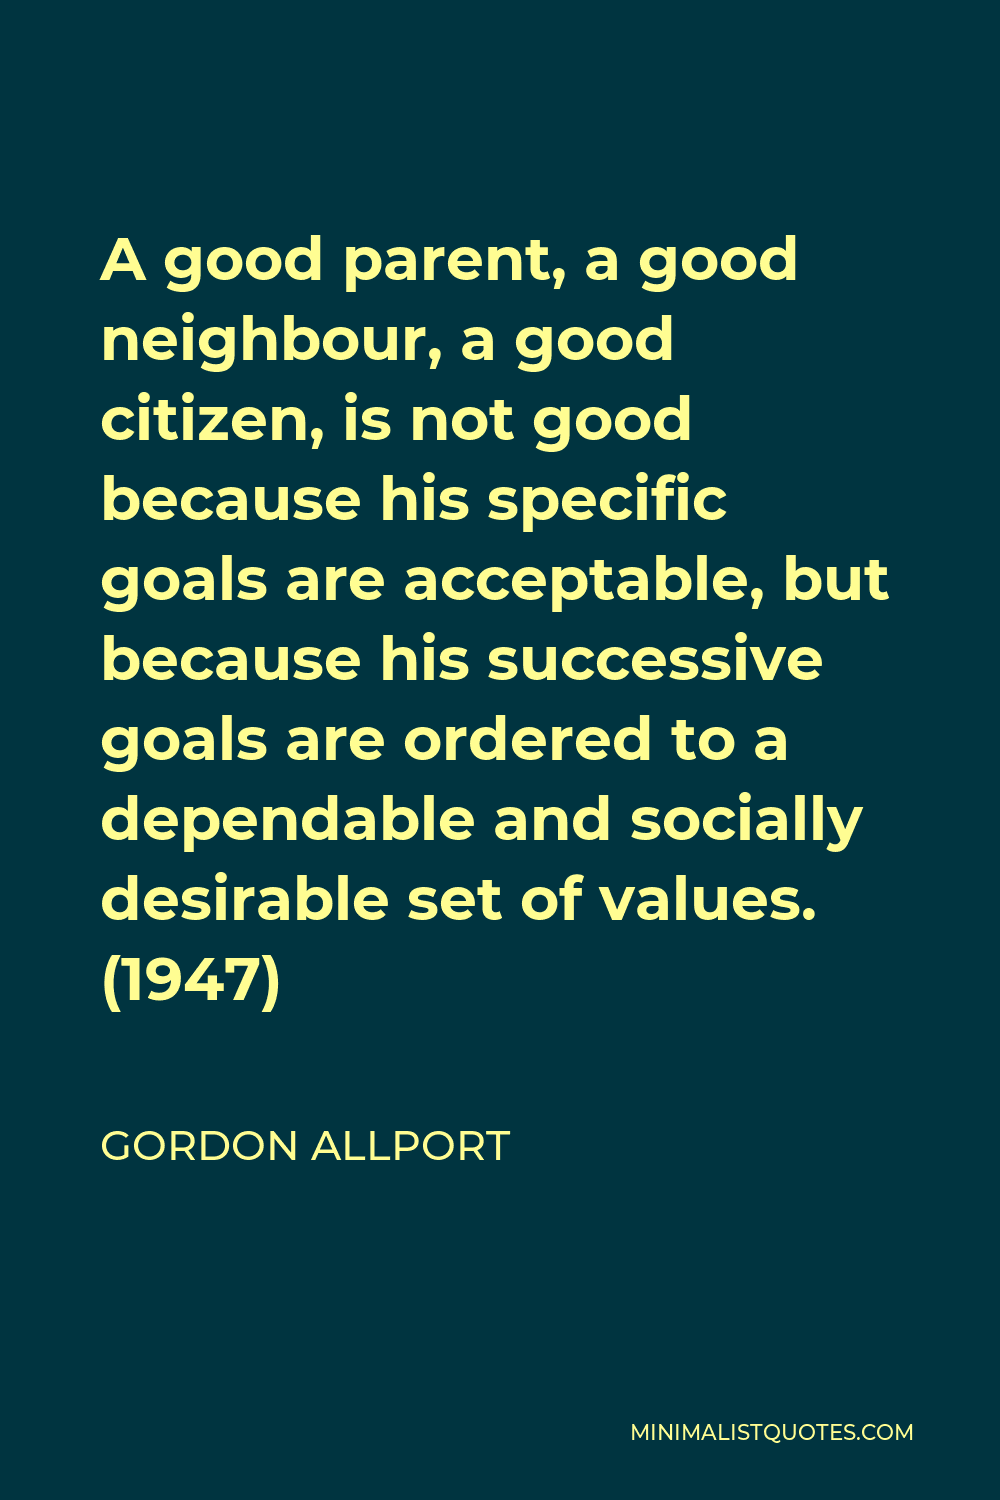 Gordon Allport Quote - A good parent, a good neighbour, a good citizen, is not good because his specific goals are acceptable, but because his successive goals are ordered to a dependable and socially desirable set of values. (1947)